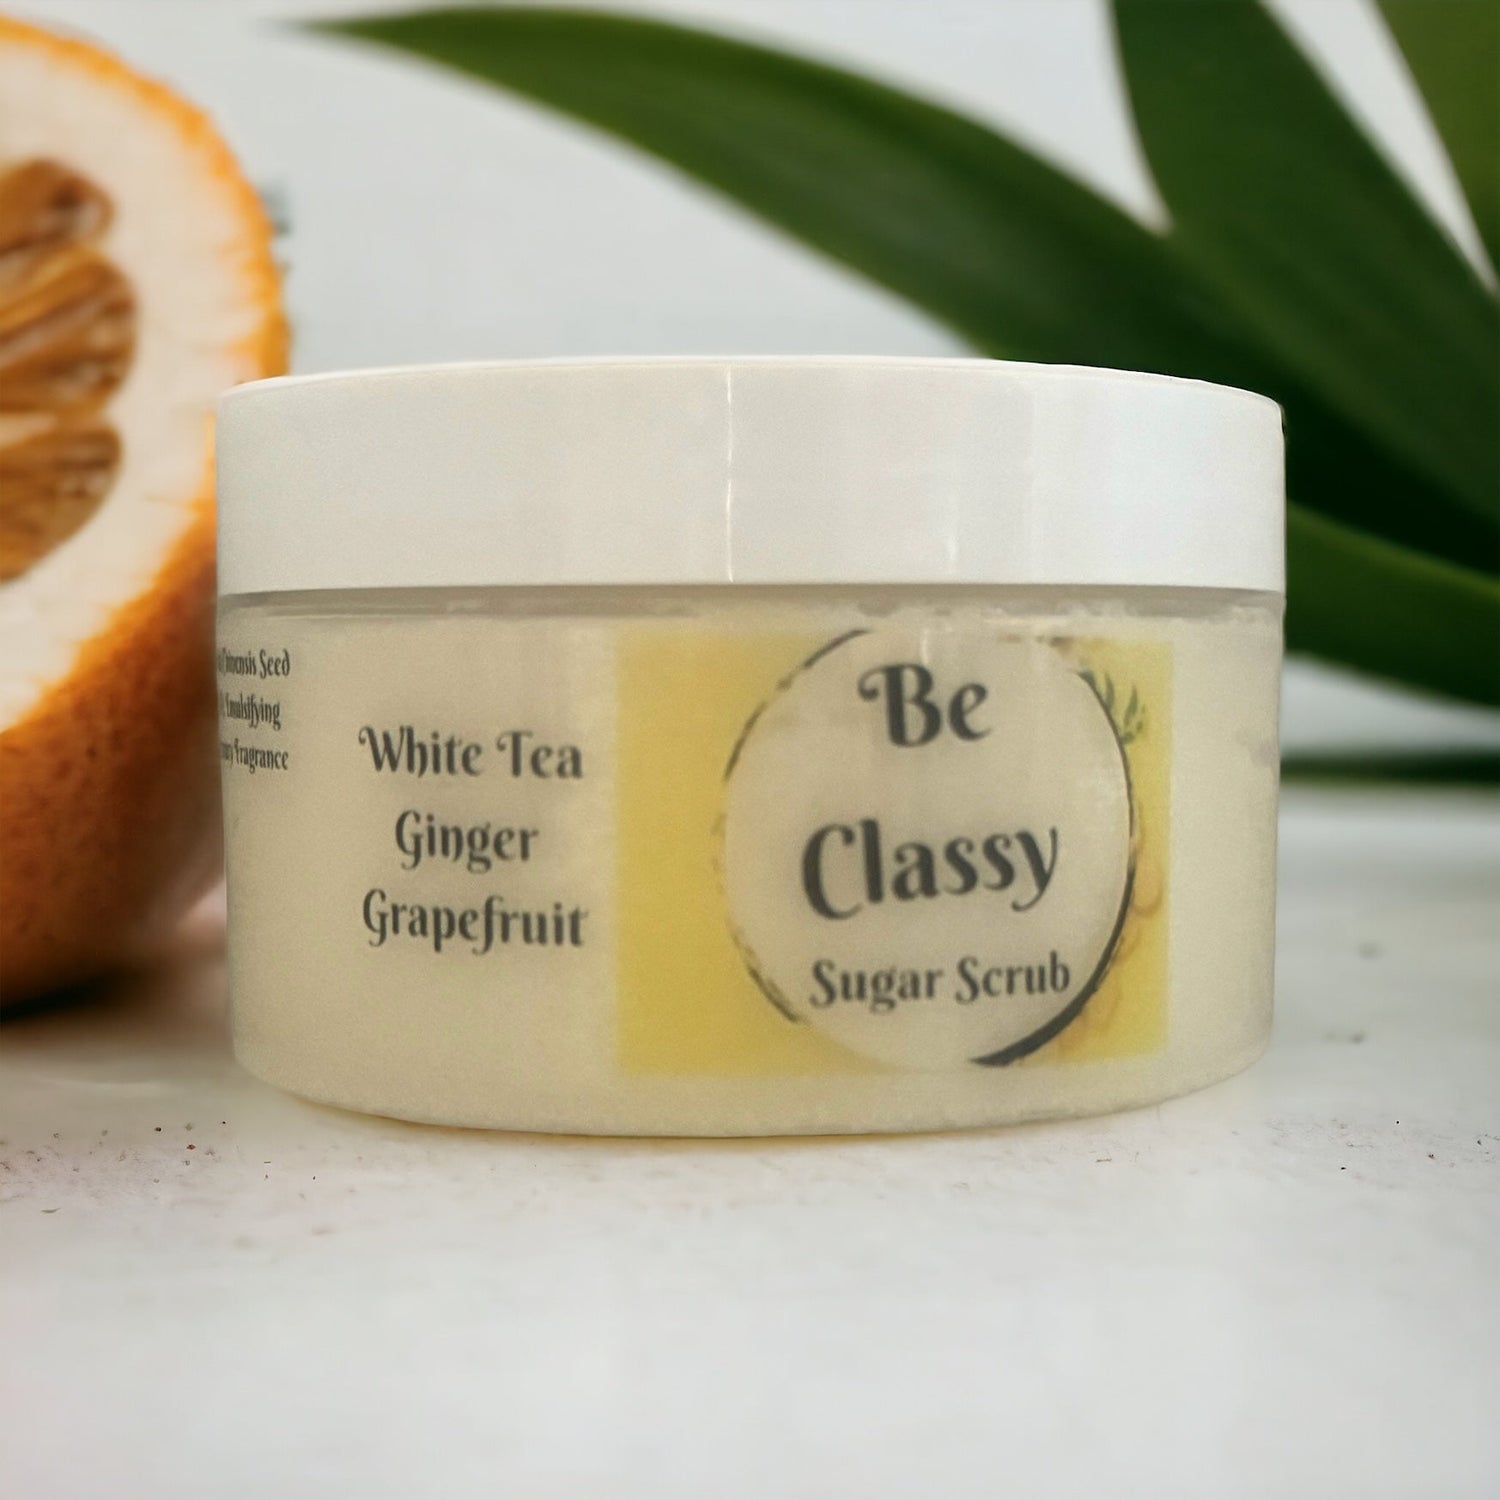 Be Classy, with our emulsified sugar scrub. A blend of White Tea, Ginger and Grapefruit. 10 ounces